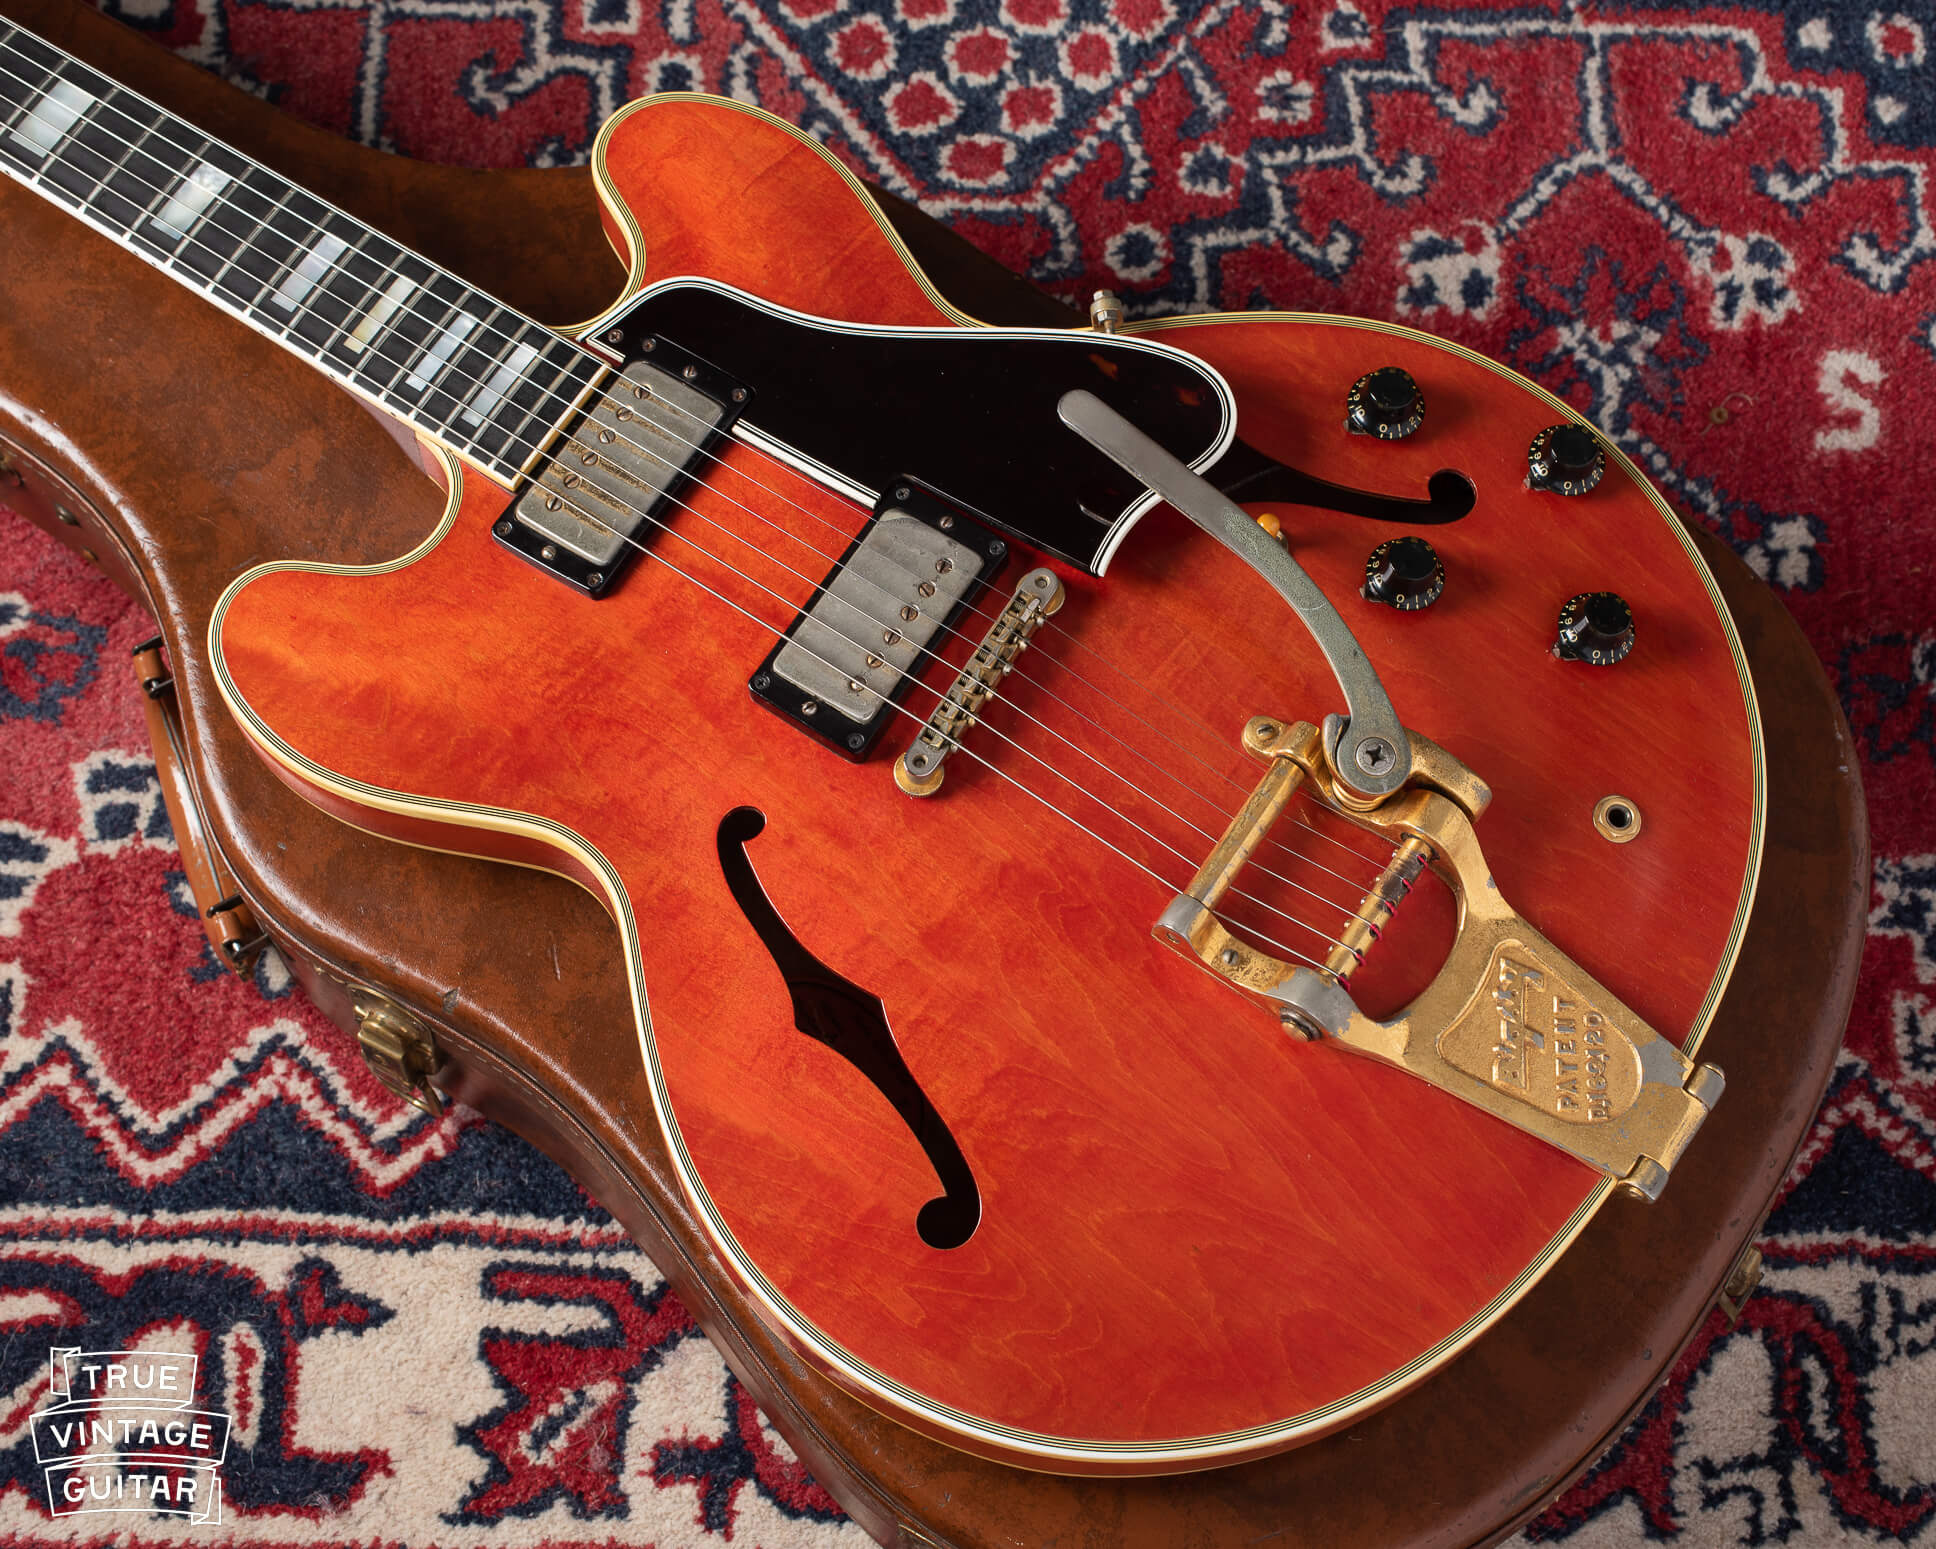 1959 Gibson ES-355 T electric guitar with watermelon red color and gold Bigbsy tailpiece